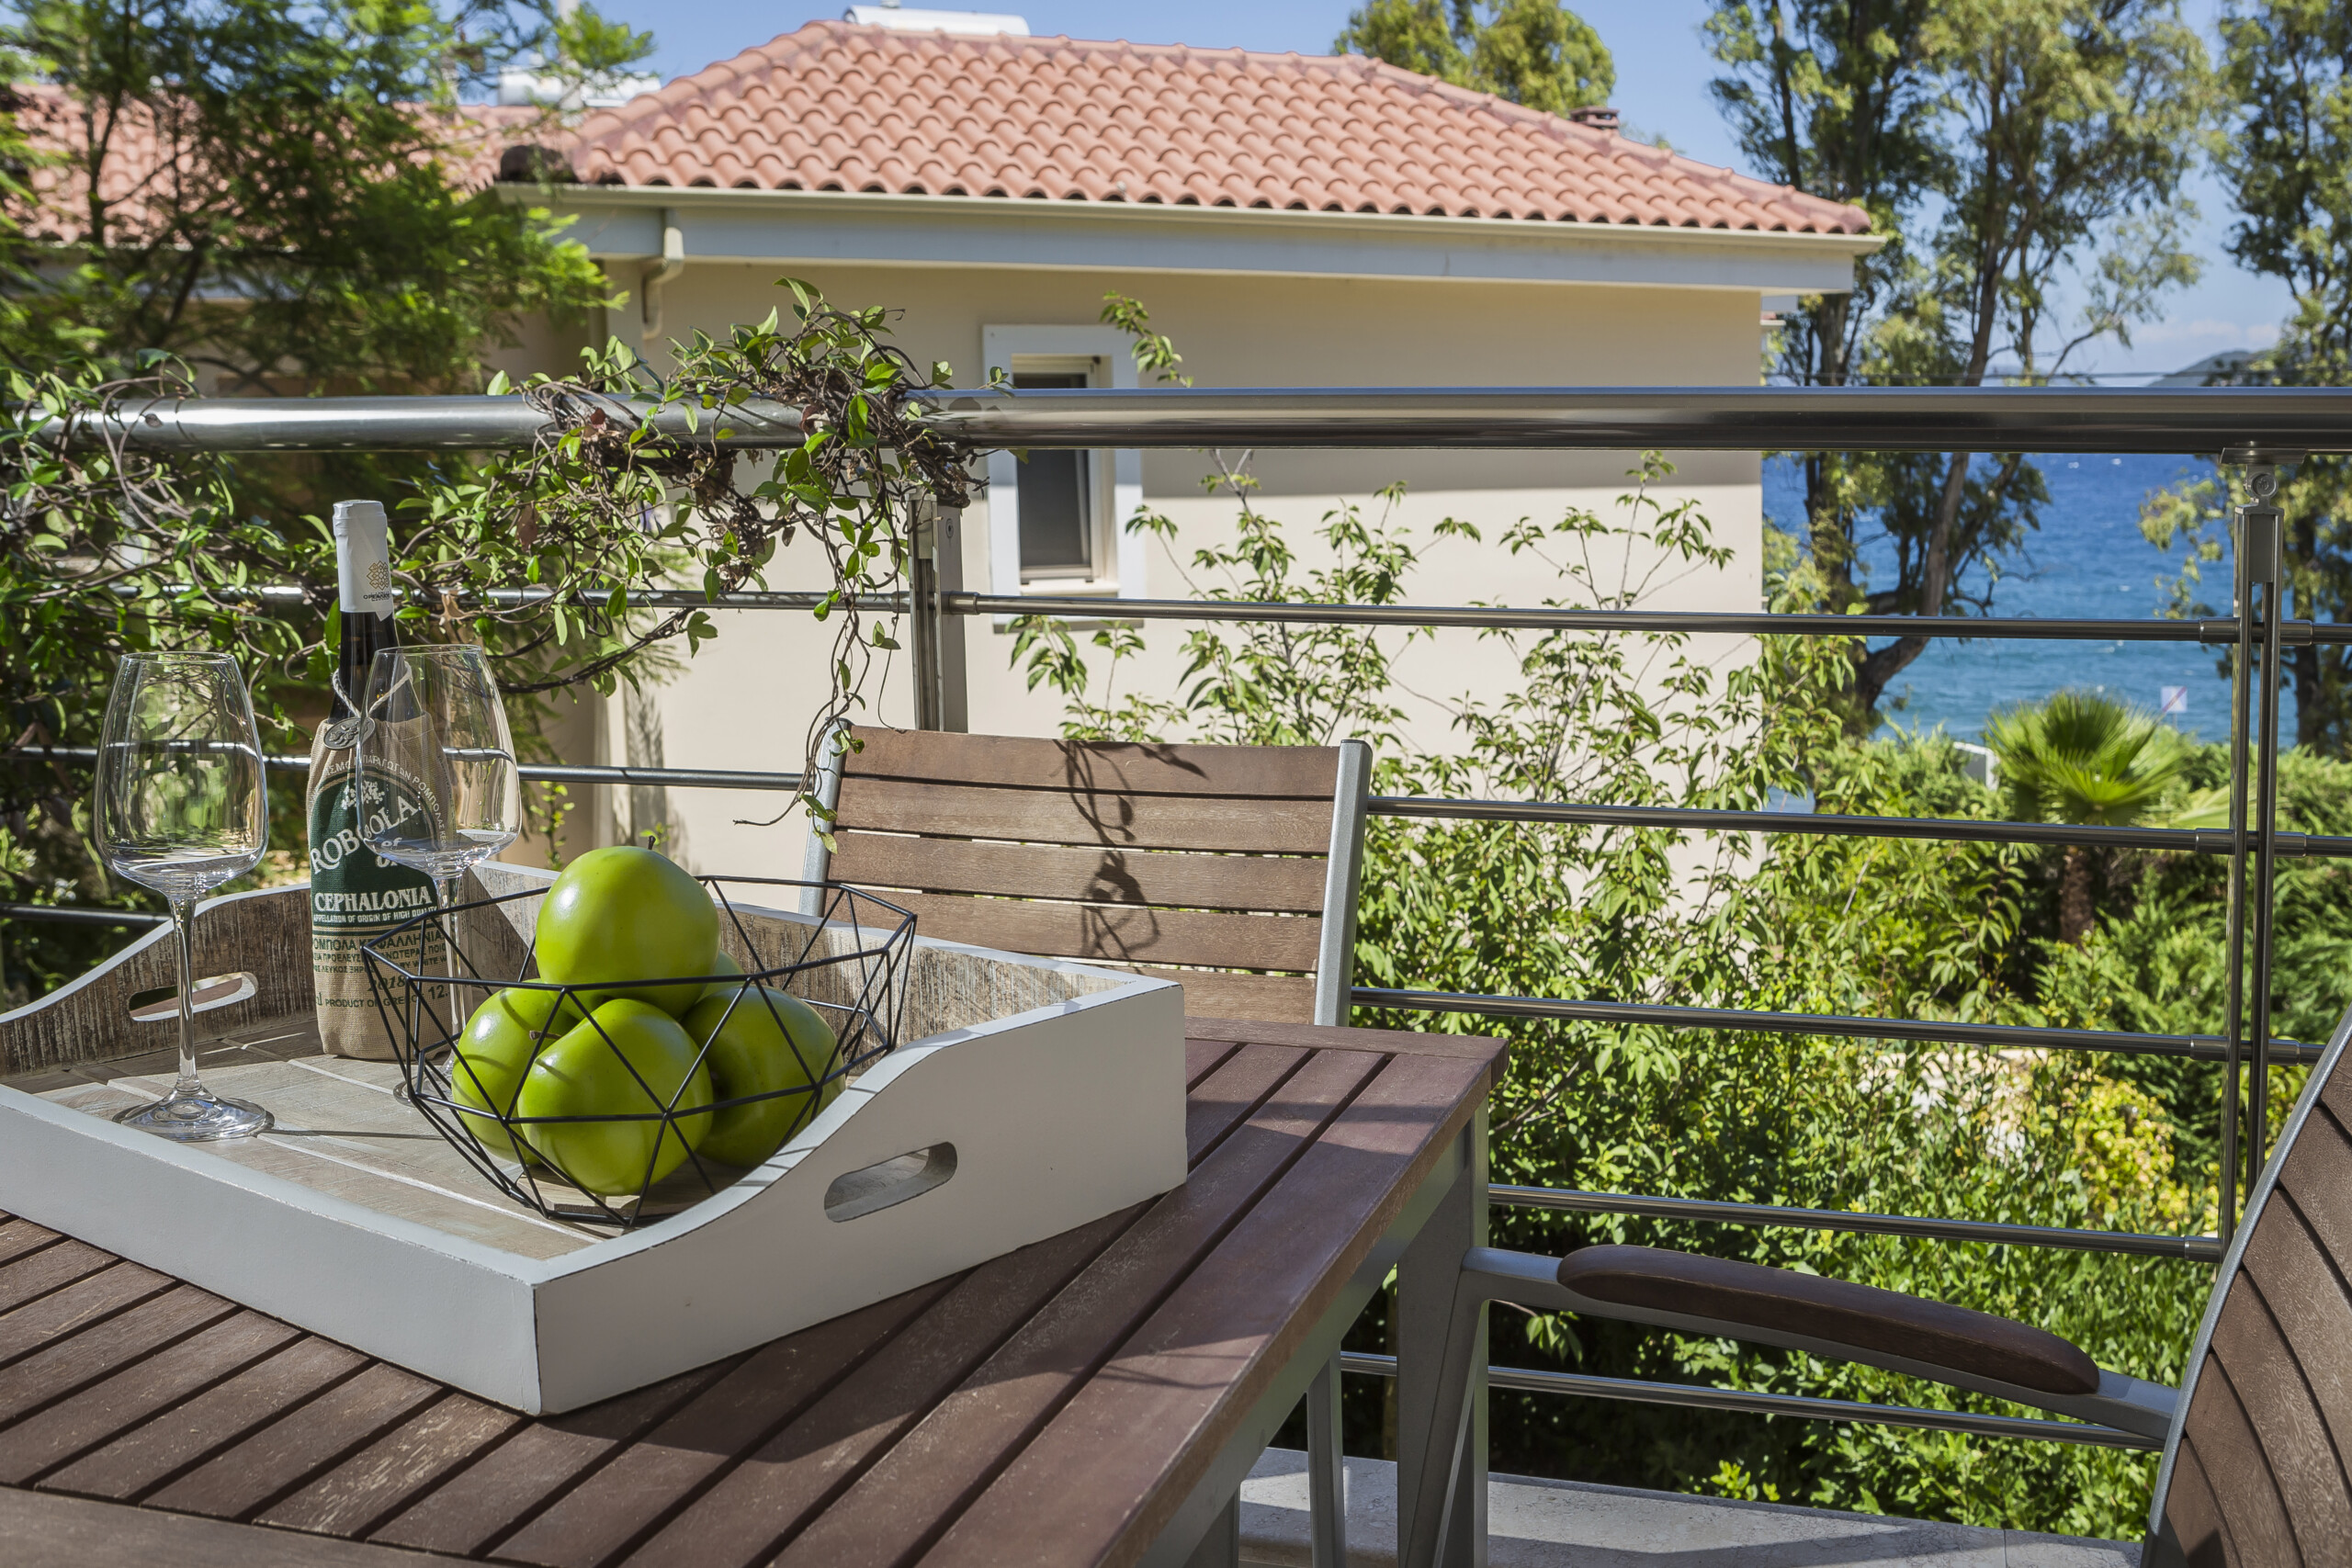 Planning on visiting Kefalonia? Stay at our waterfront suites at Karavomilos.